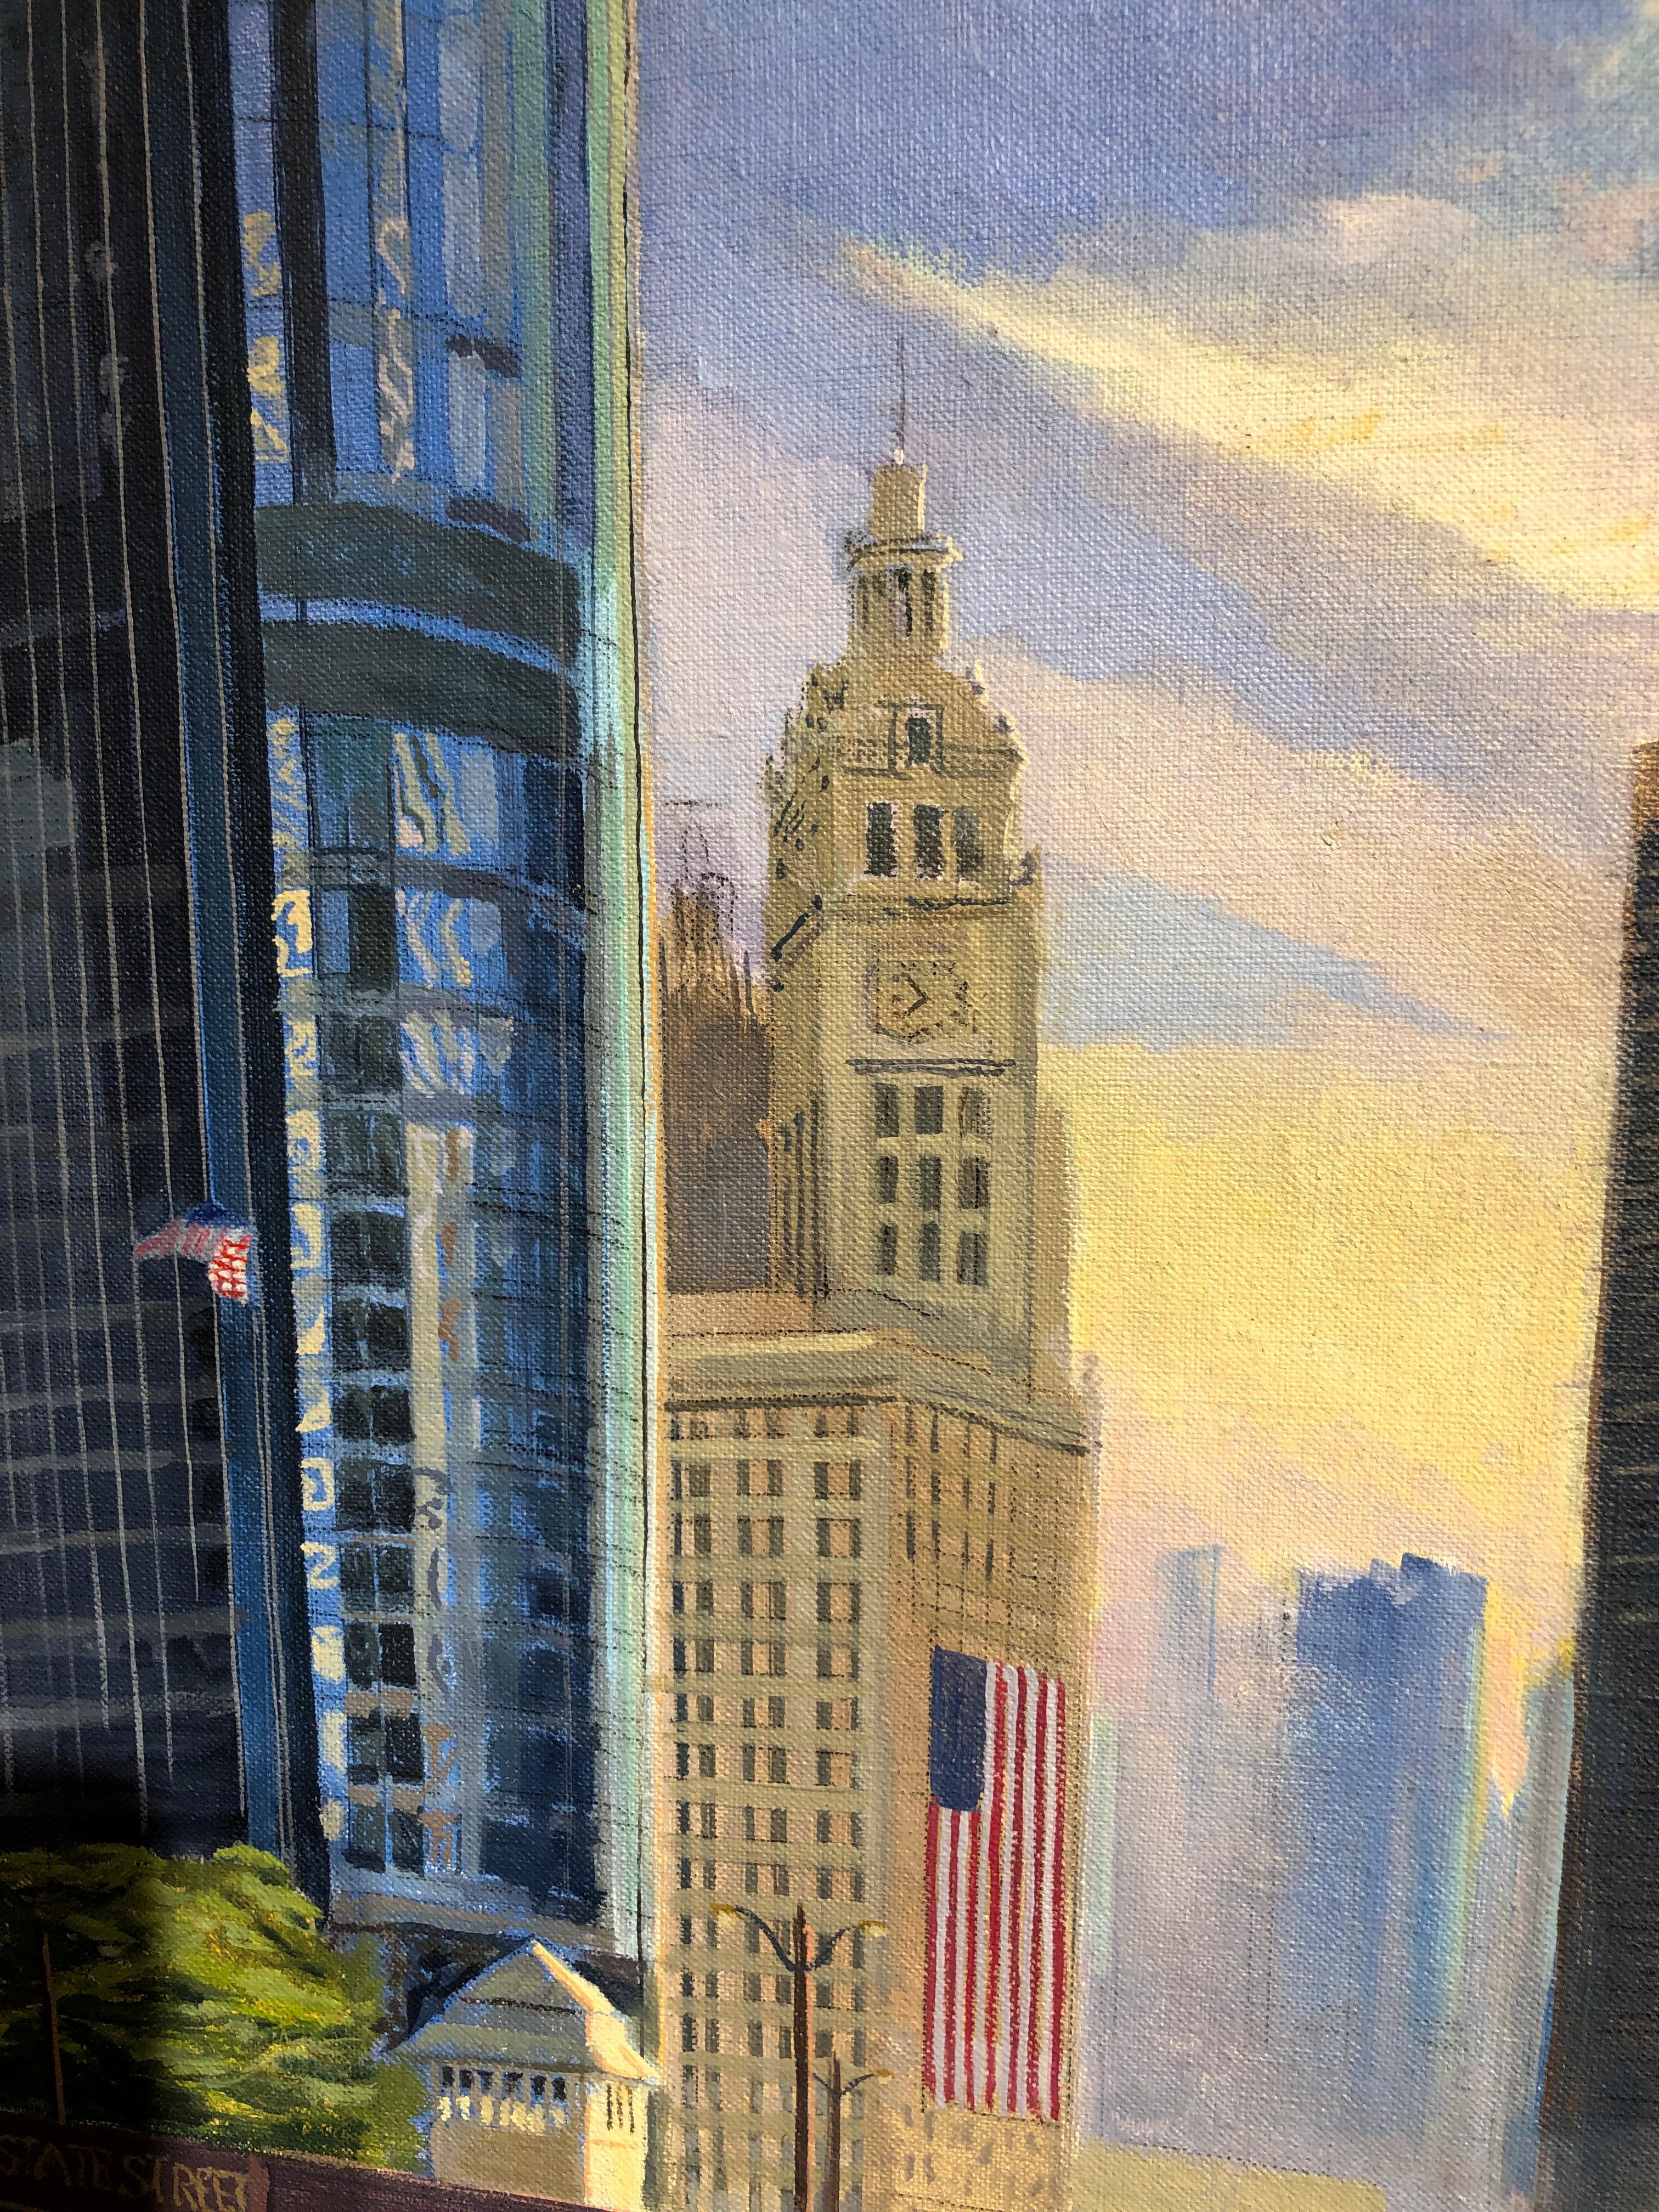 Chicago River at State Street - Rising Sun Urban Landscape Original Oil Painting 2